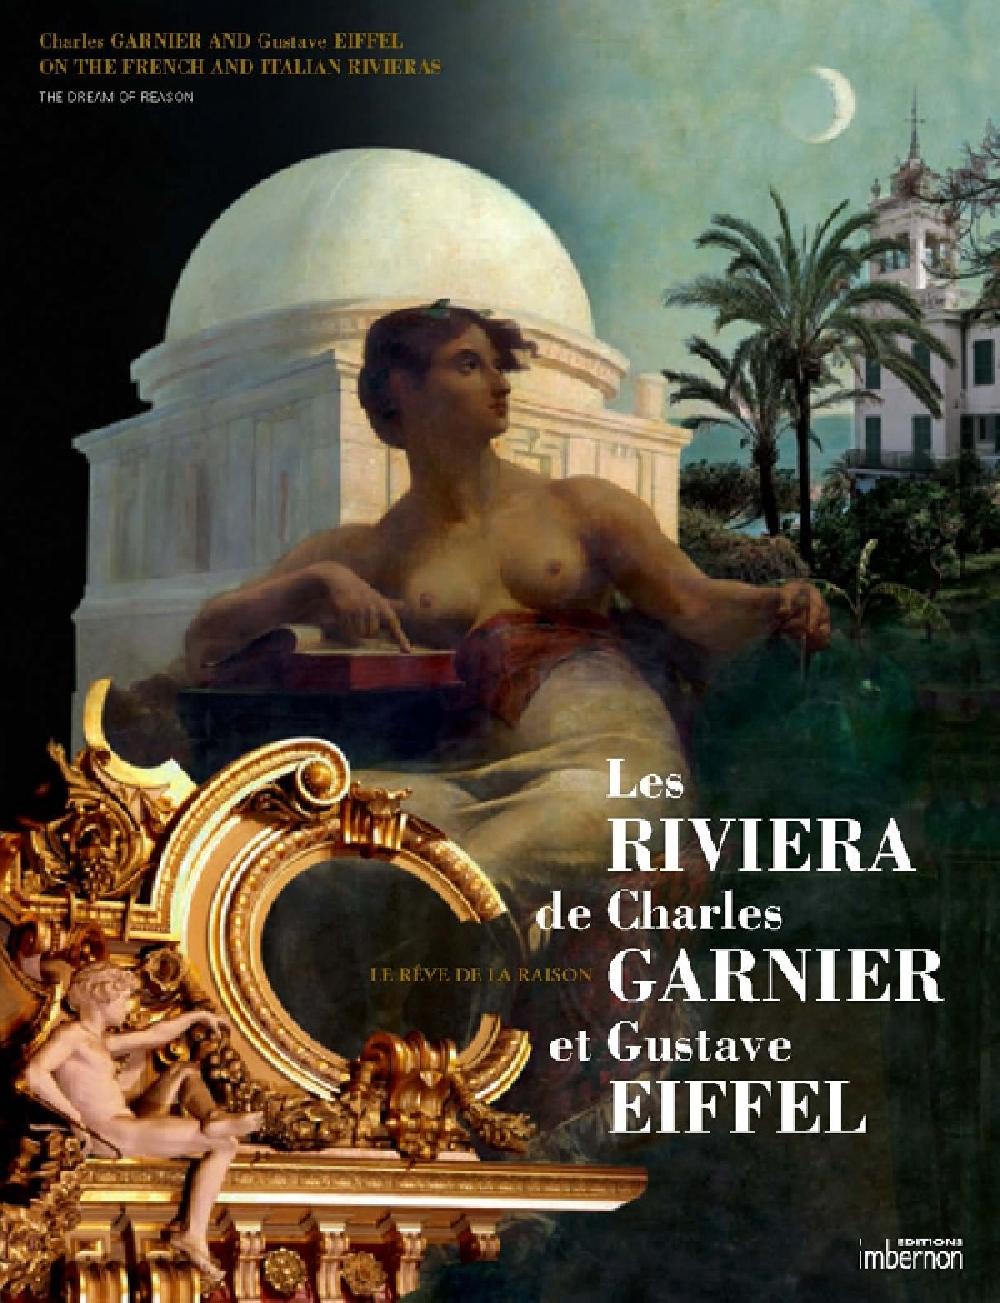 Charles Garnier and Gustave Eiffel on French and Italian Rivieras: The Dream of Reason